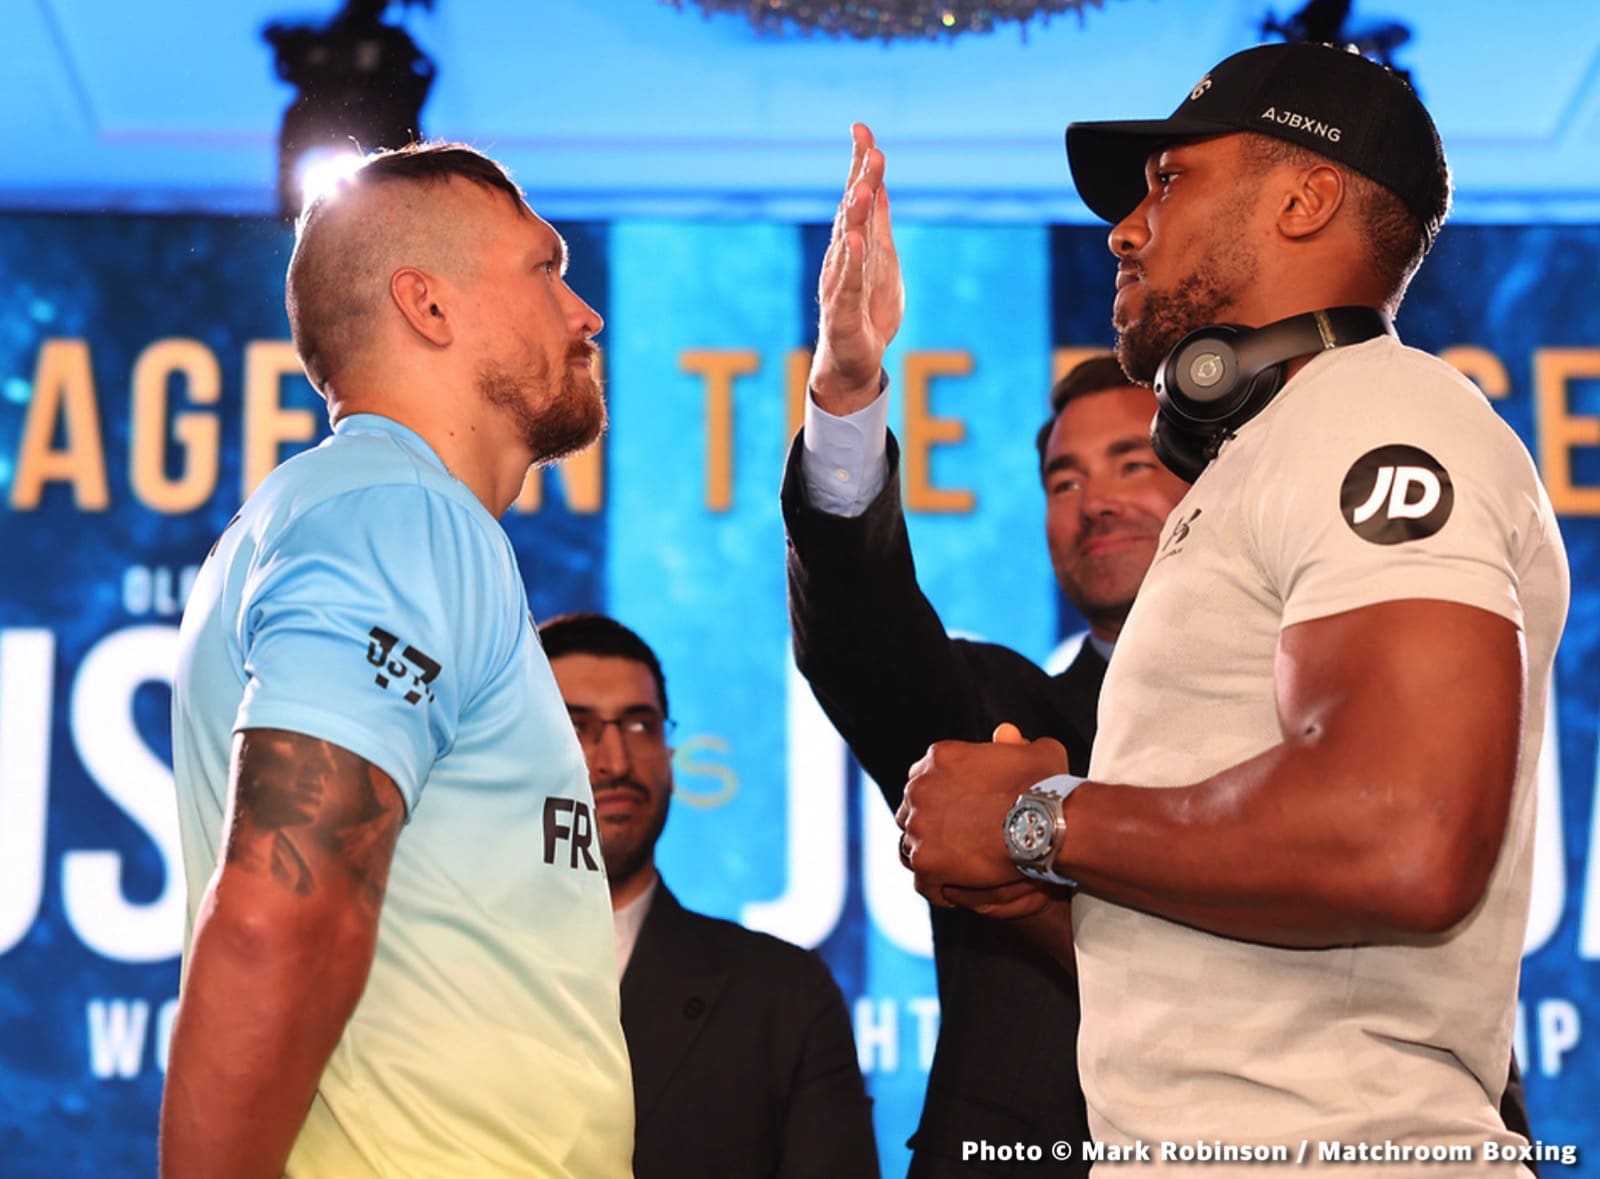 Image: Usyk vs Joshua Official DAZN / SKY Weigh In Results